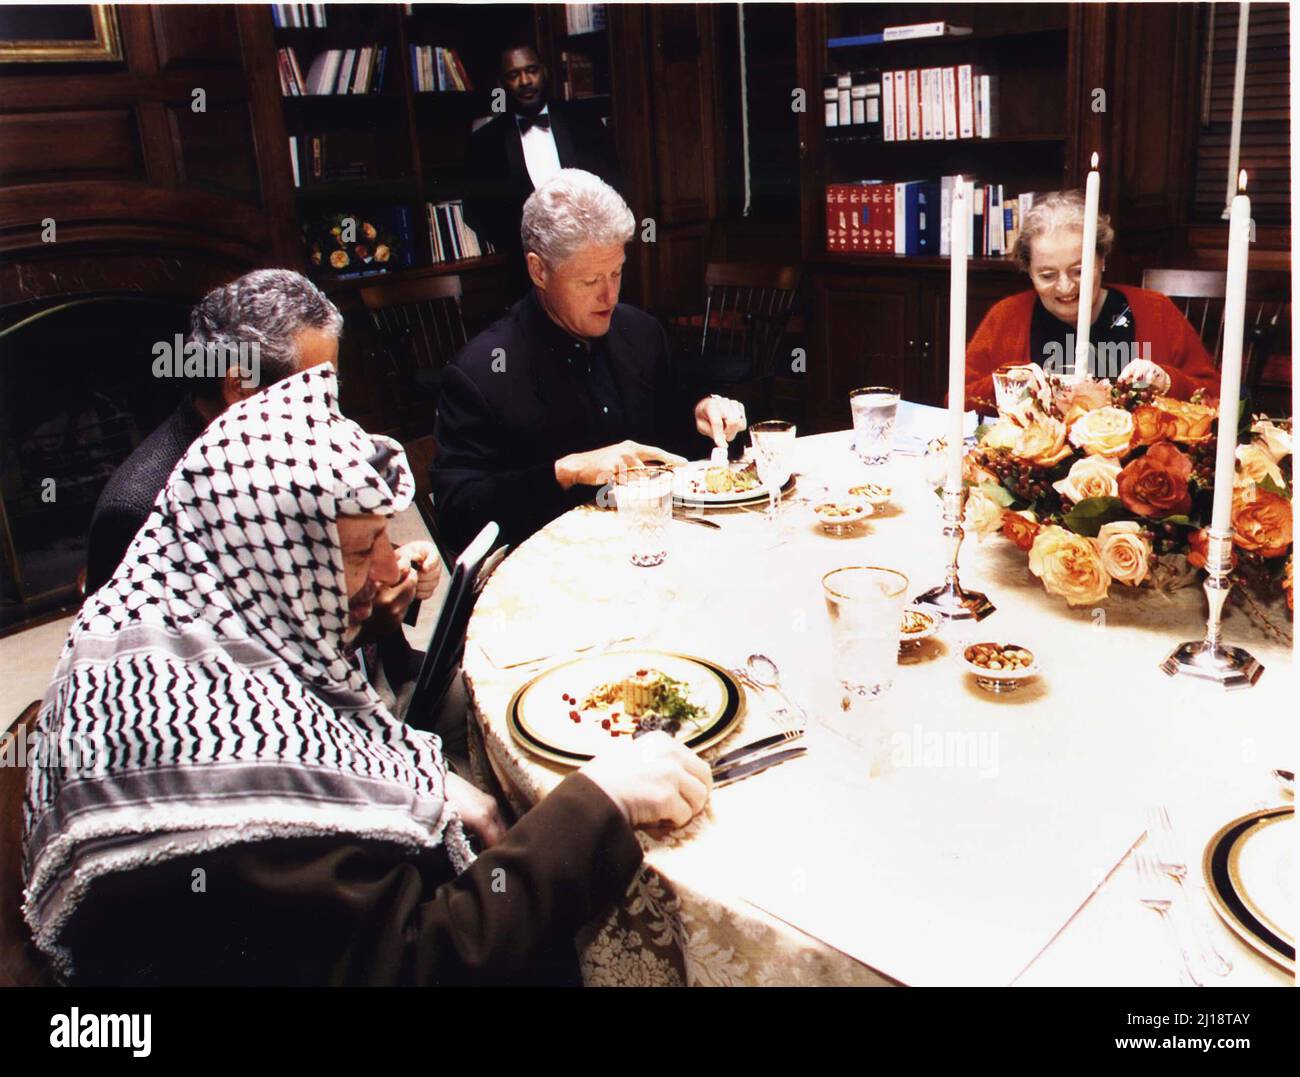 The Working Dinner at The Washington Summit at Wye River on Saturday, October 17, 1998. Pictured left to right: Palestinian Authority Chairman Yasser Arafat; Gamal Helal, The Interpreter; United States President Bill Clinton; United States Secretary of State Madeleine Albright.Mandatory Credit: White House via CNP/Sipa USA Credit: Sipa USA/Alamy Live News Stock Photo